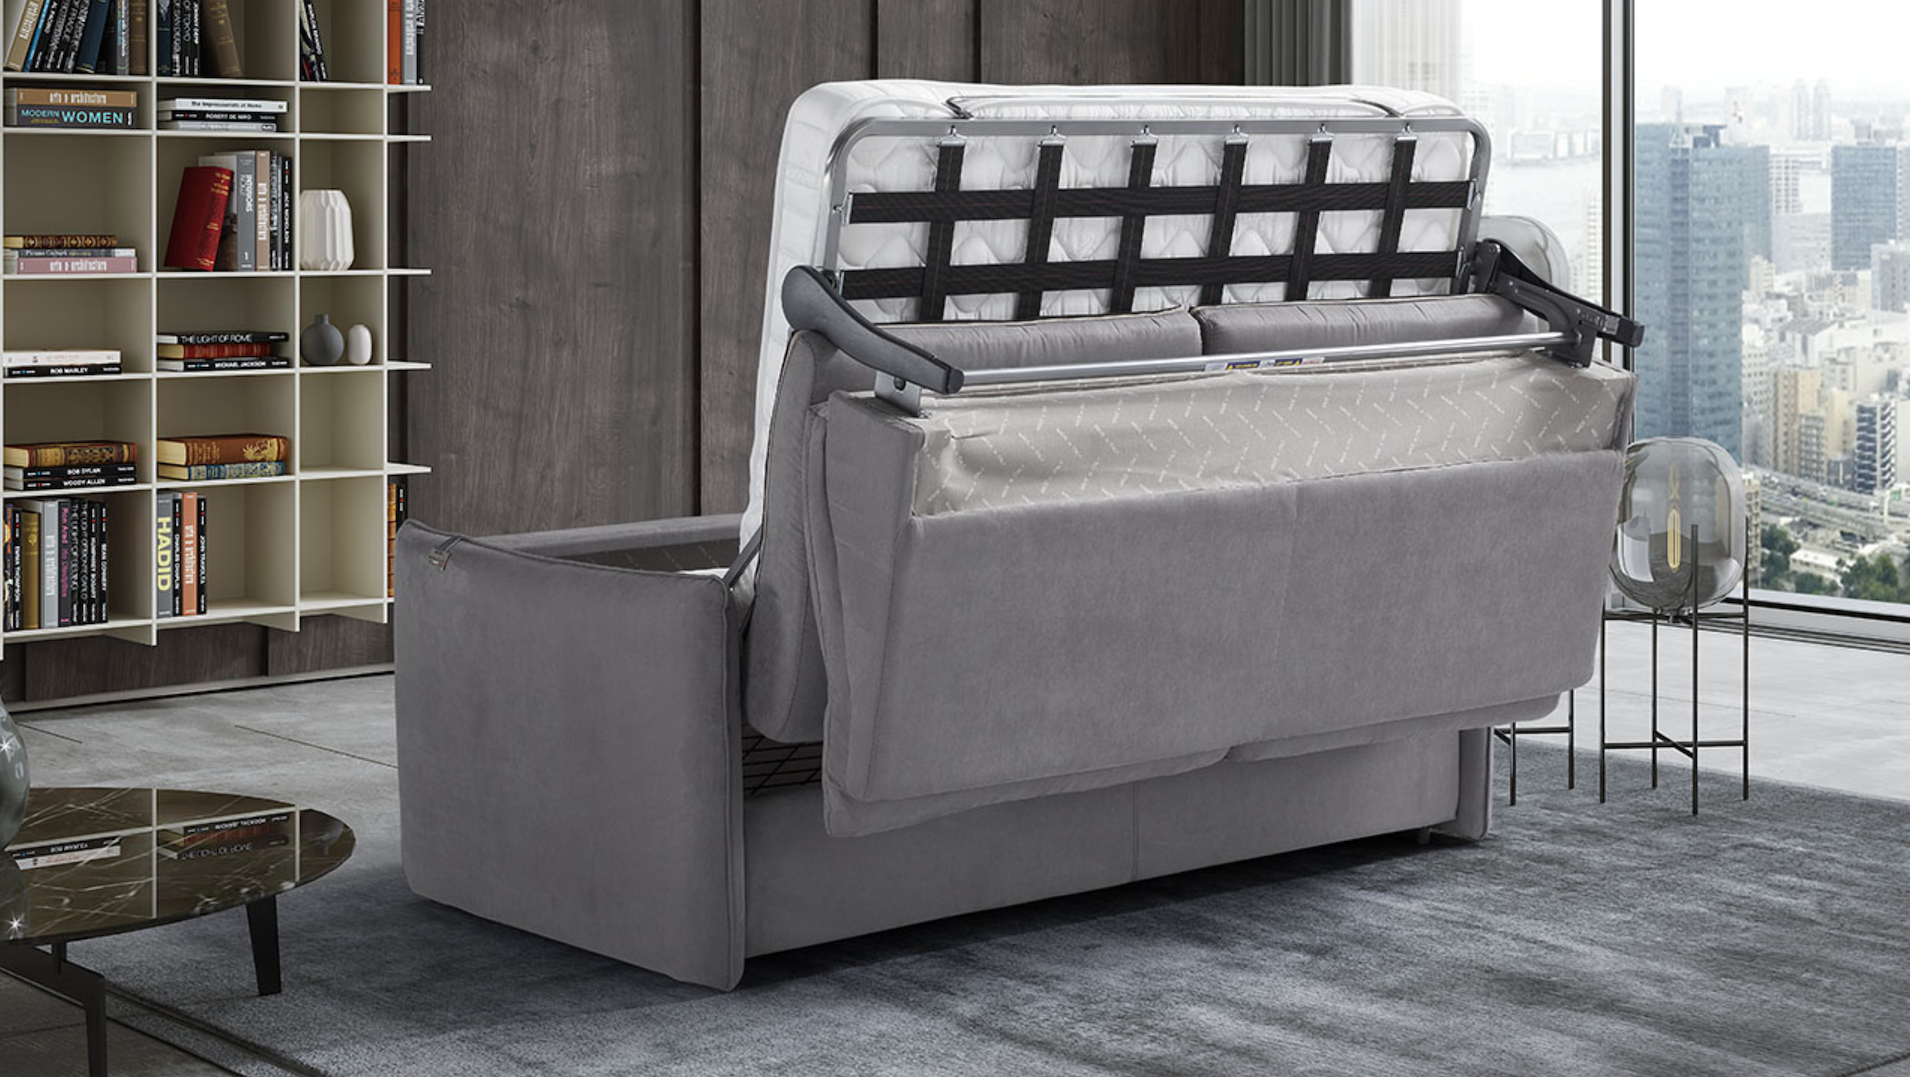 AIMEE Italian Crafted 3 Seat Sofa Bed in PLAZA GREY. RRP £1979 - Image 4 of 5